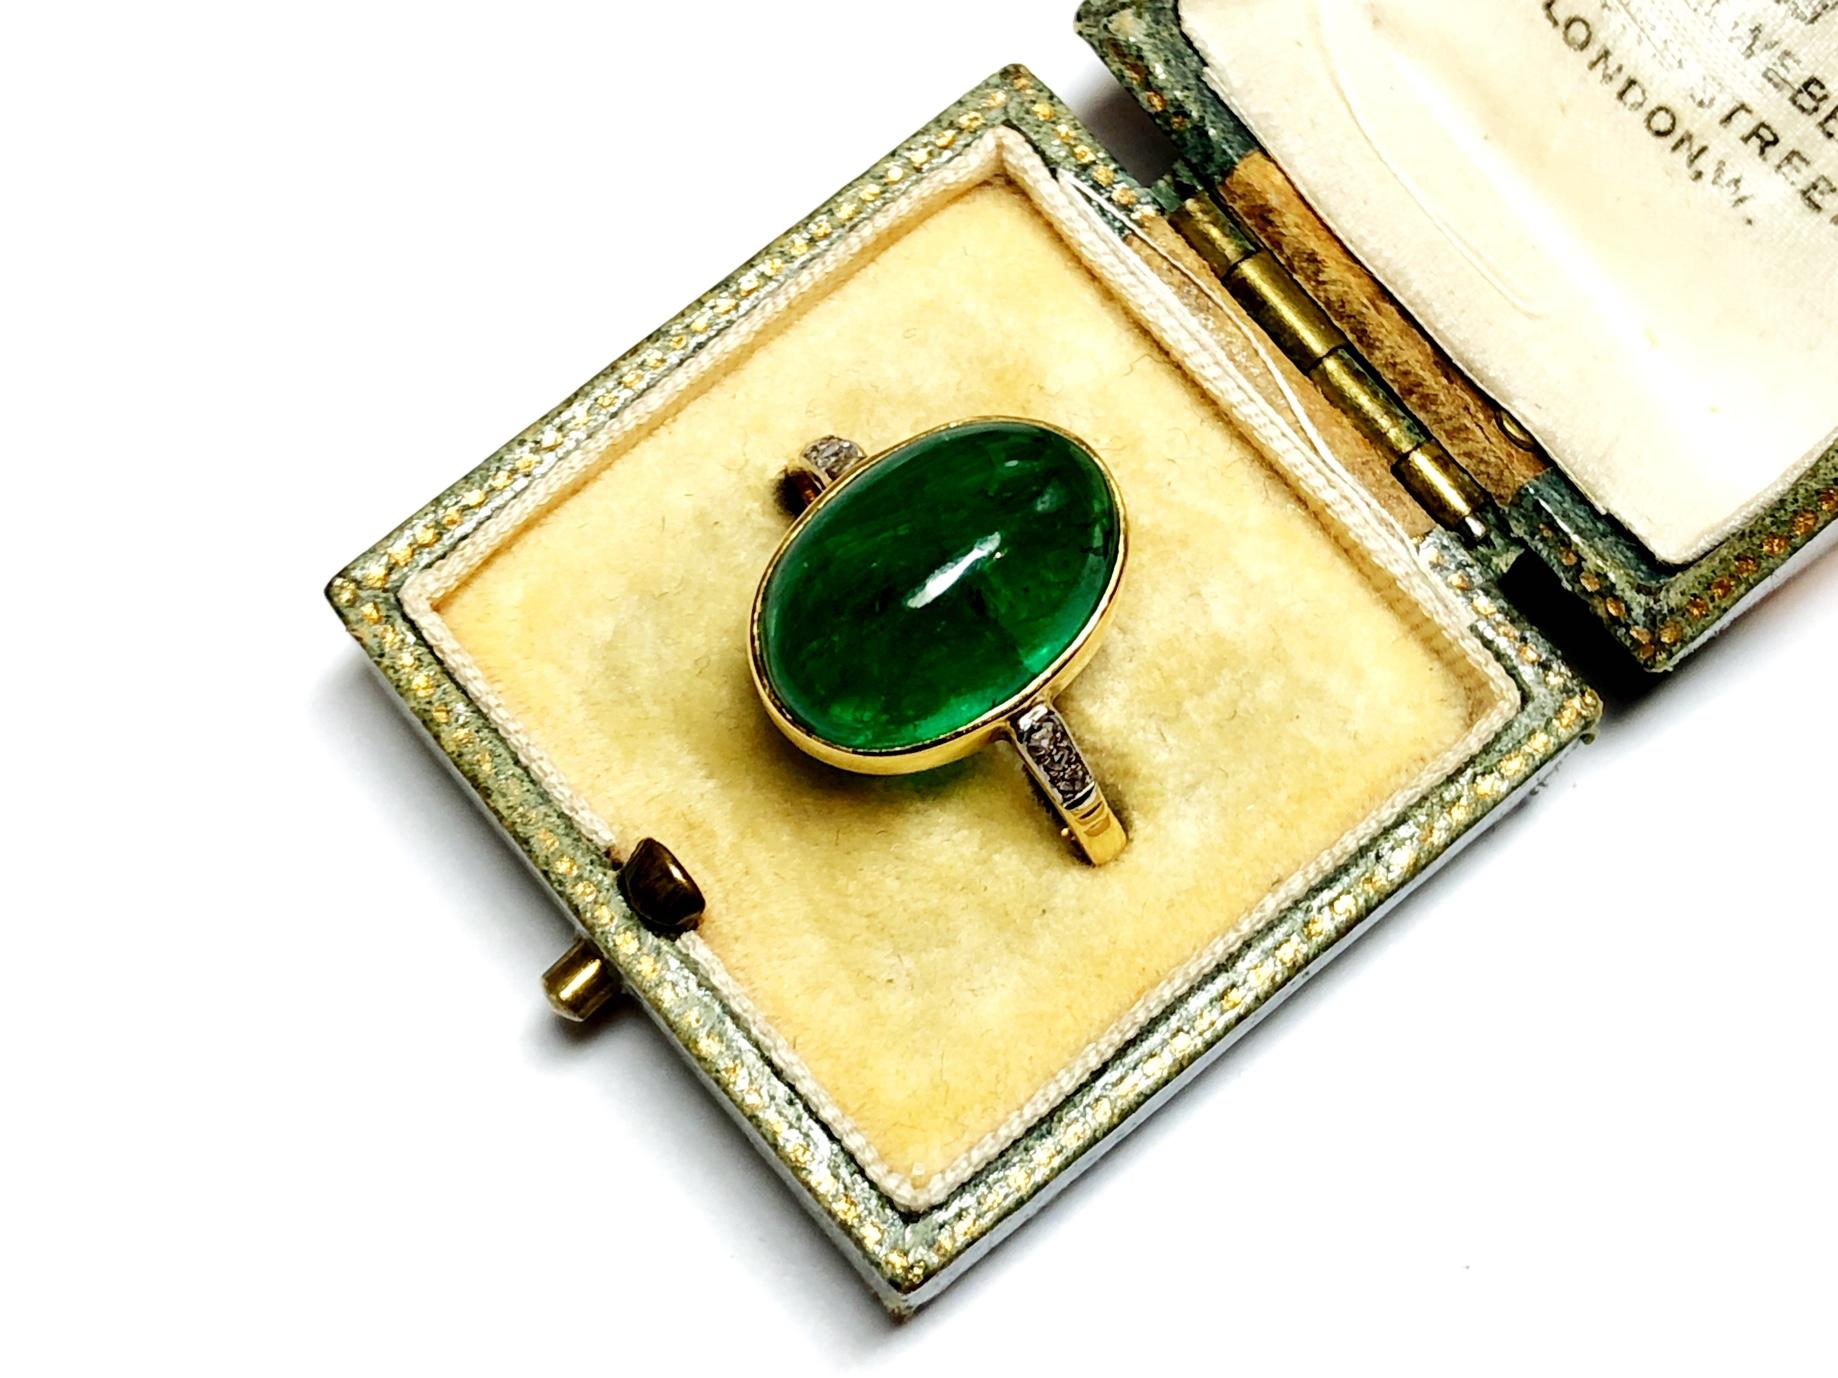 An Art Deco period emerald ring, with a cabochon-cut emerald, in a rub over setting, mounted in 18ct yellow gold, with three diamonds set in each shoulder, in white gold settings, with an estimated emerald weight of 2.90ct. English, circa 1920.